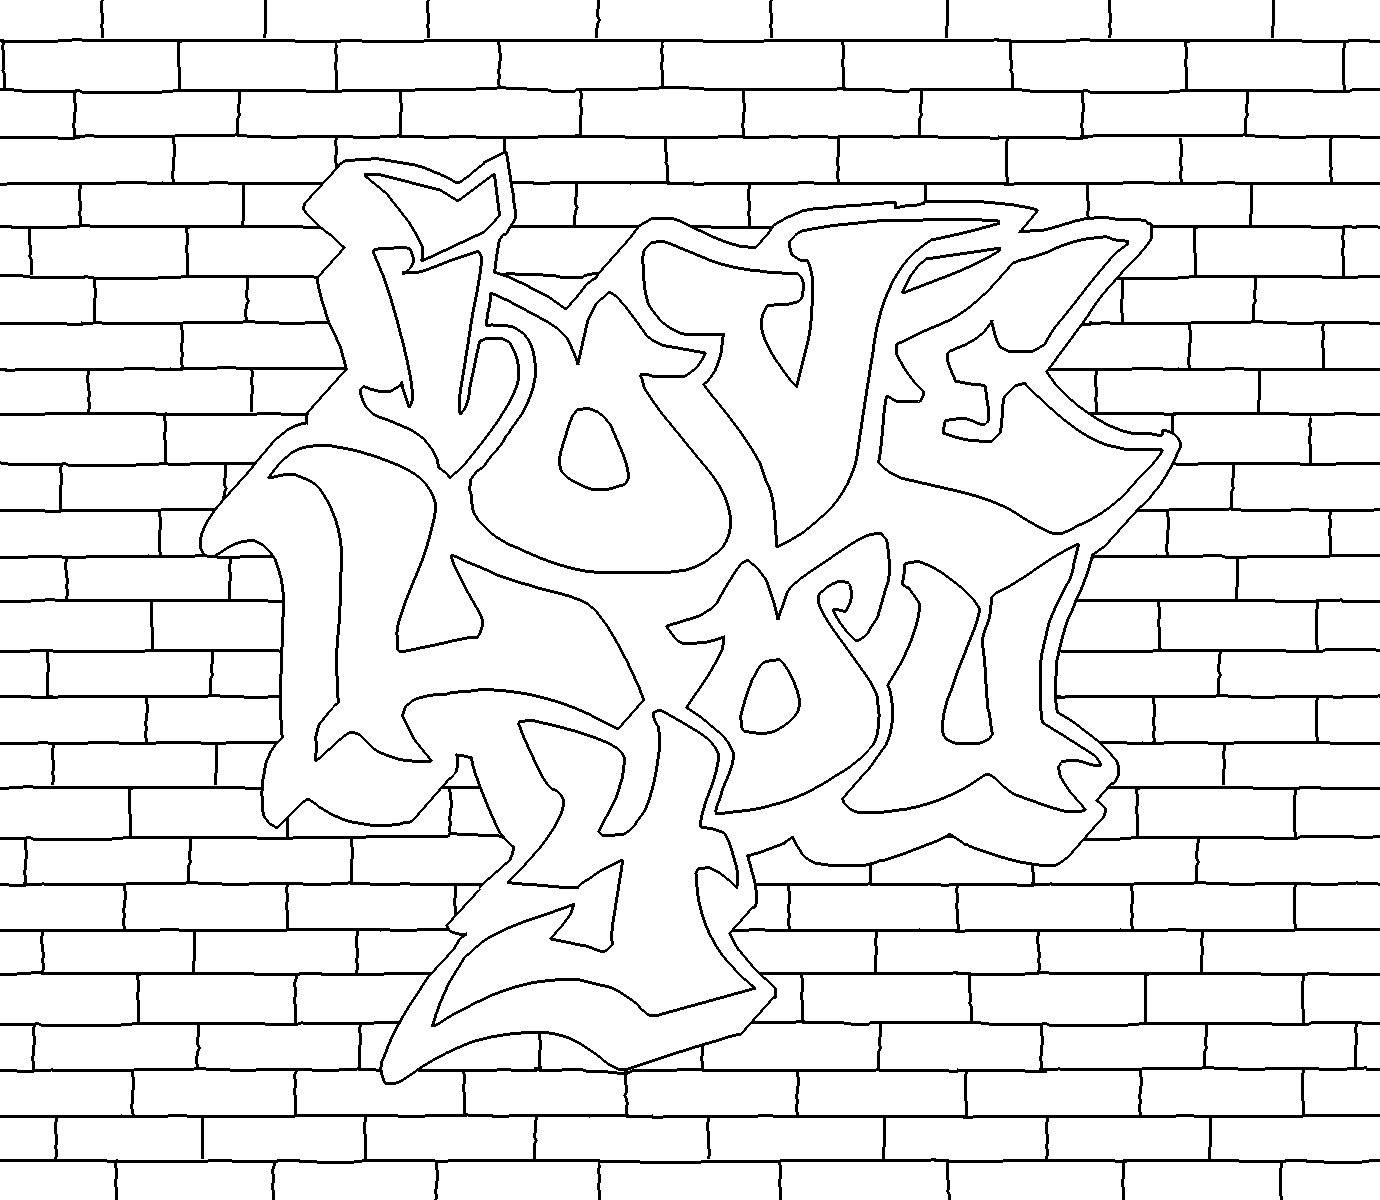 Coloring Pages For Teenagers Graffiti - boringpop.com